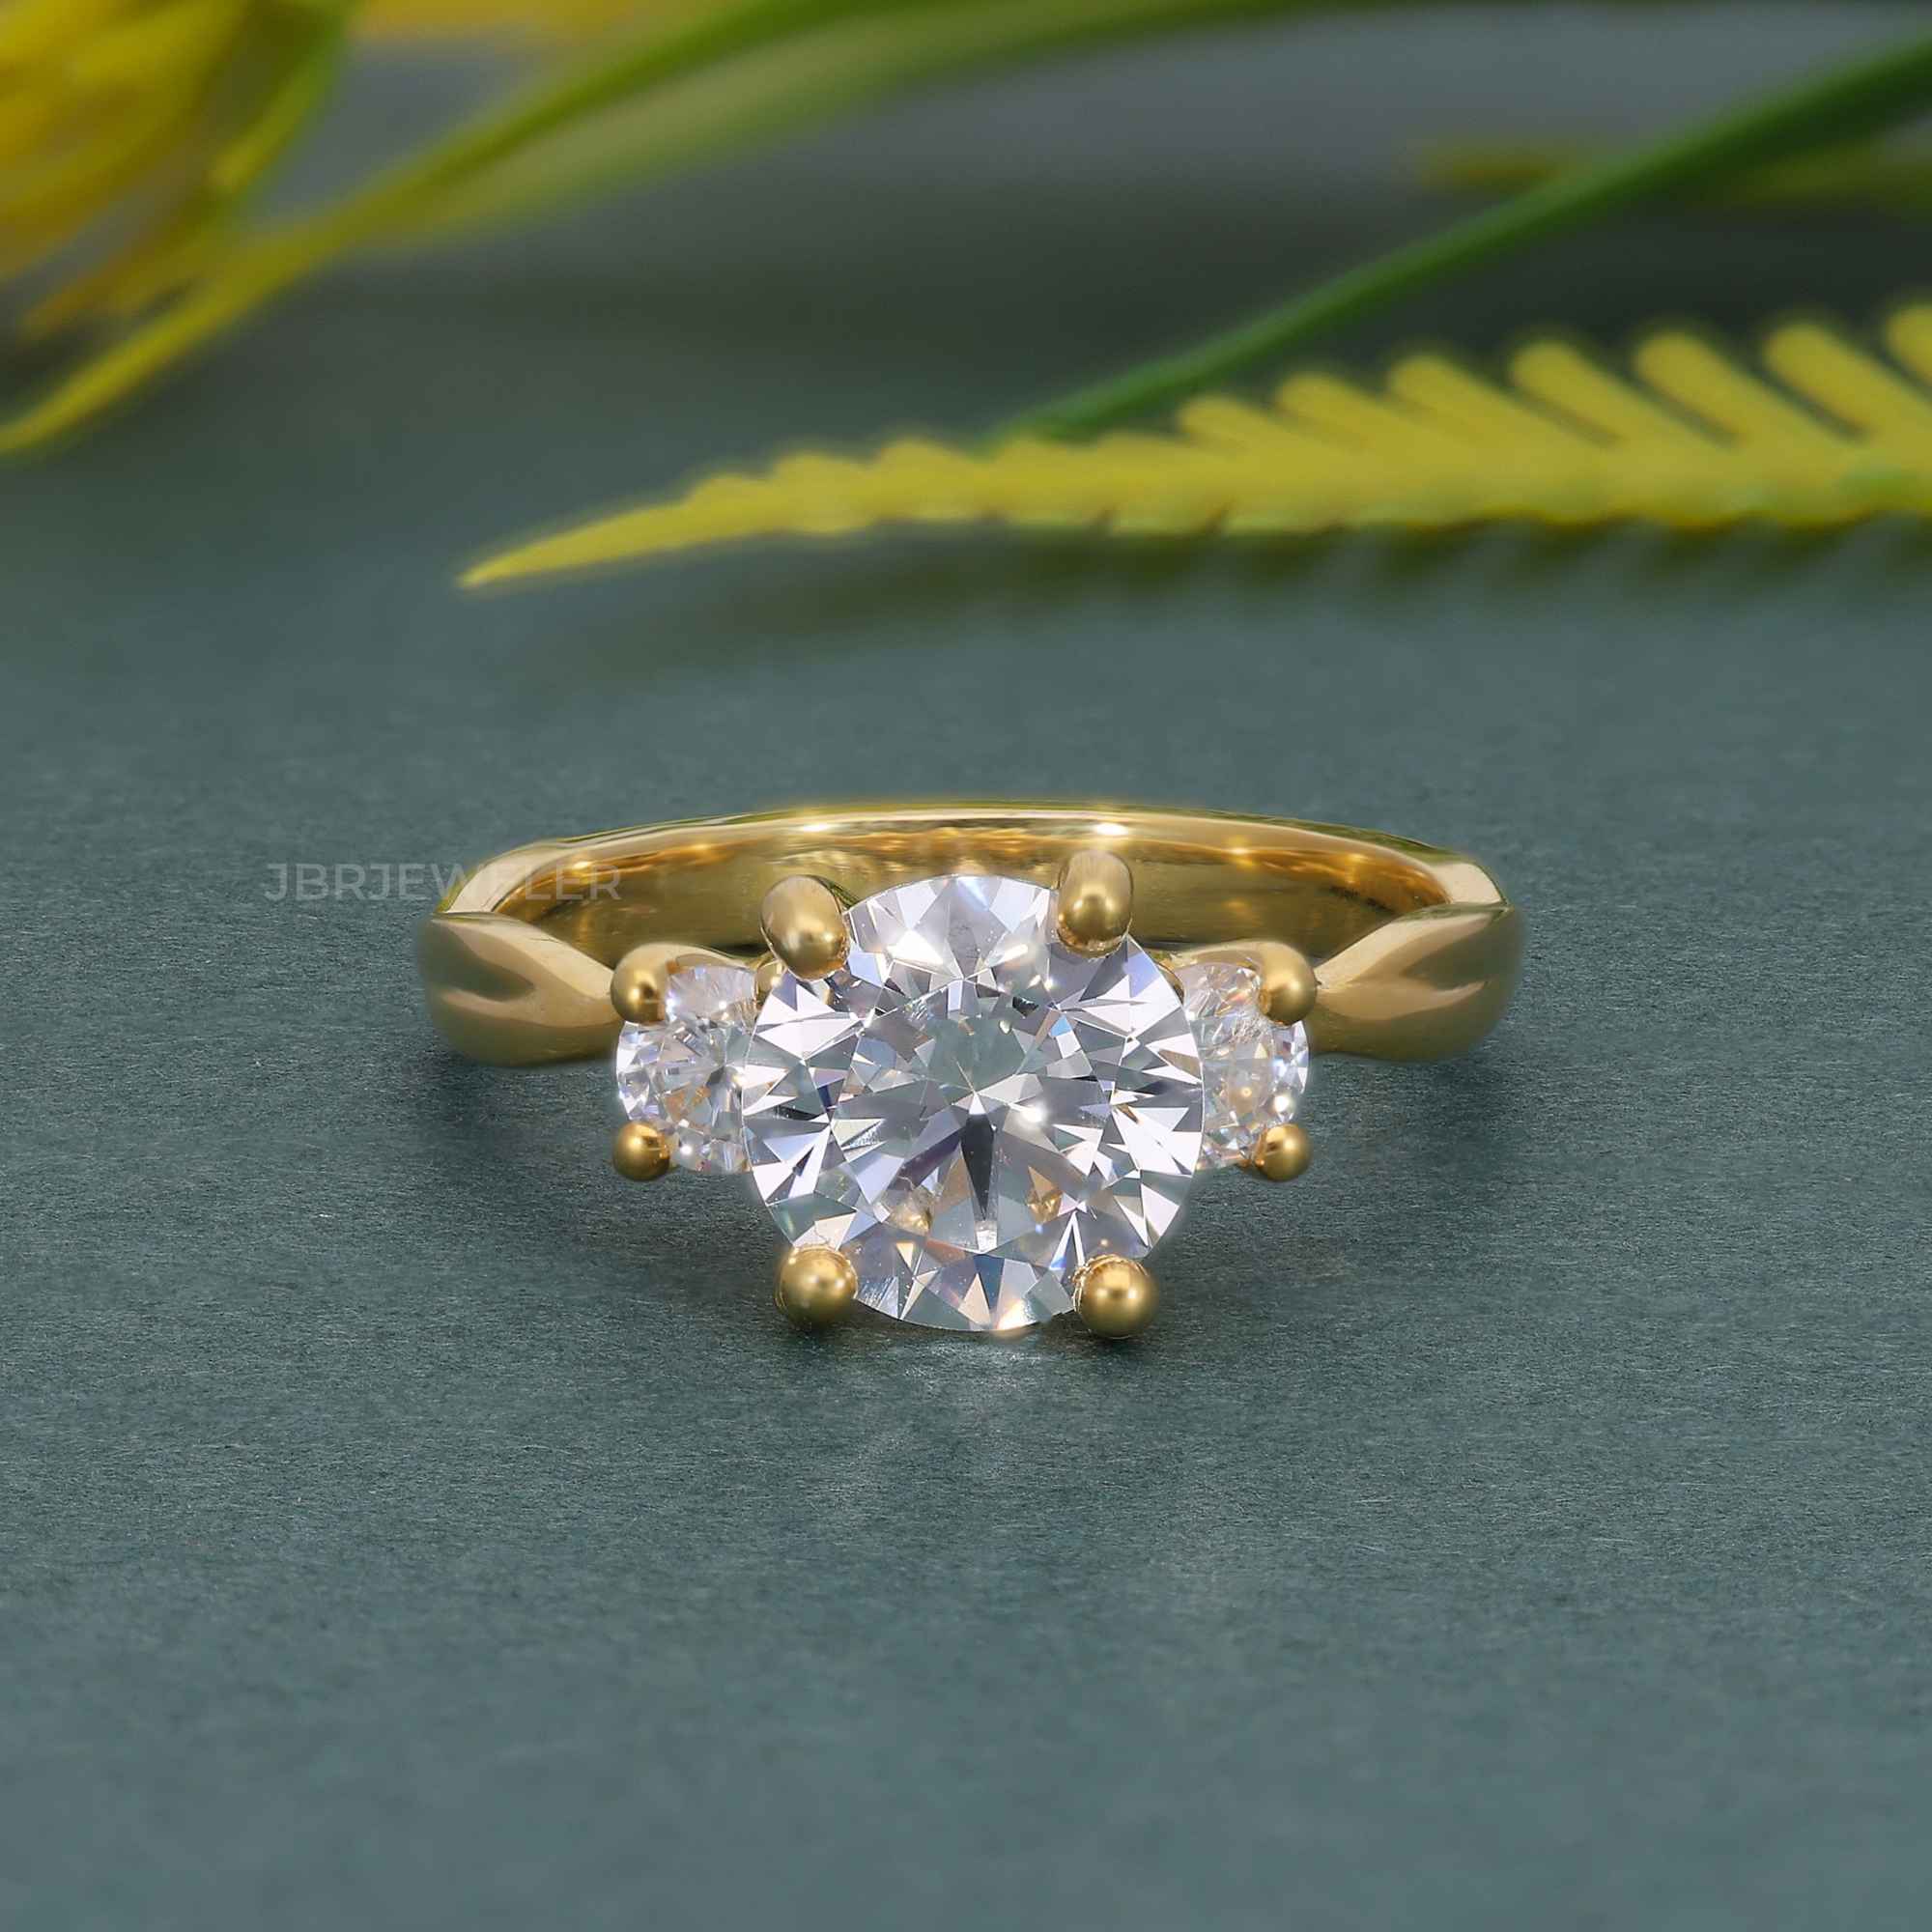 a diamond ring on a green surface